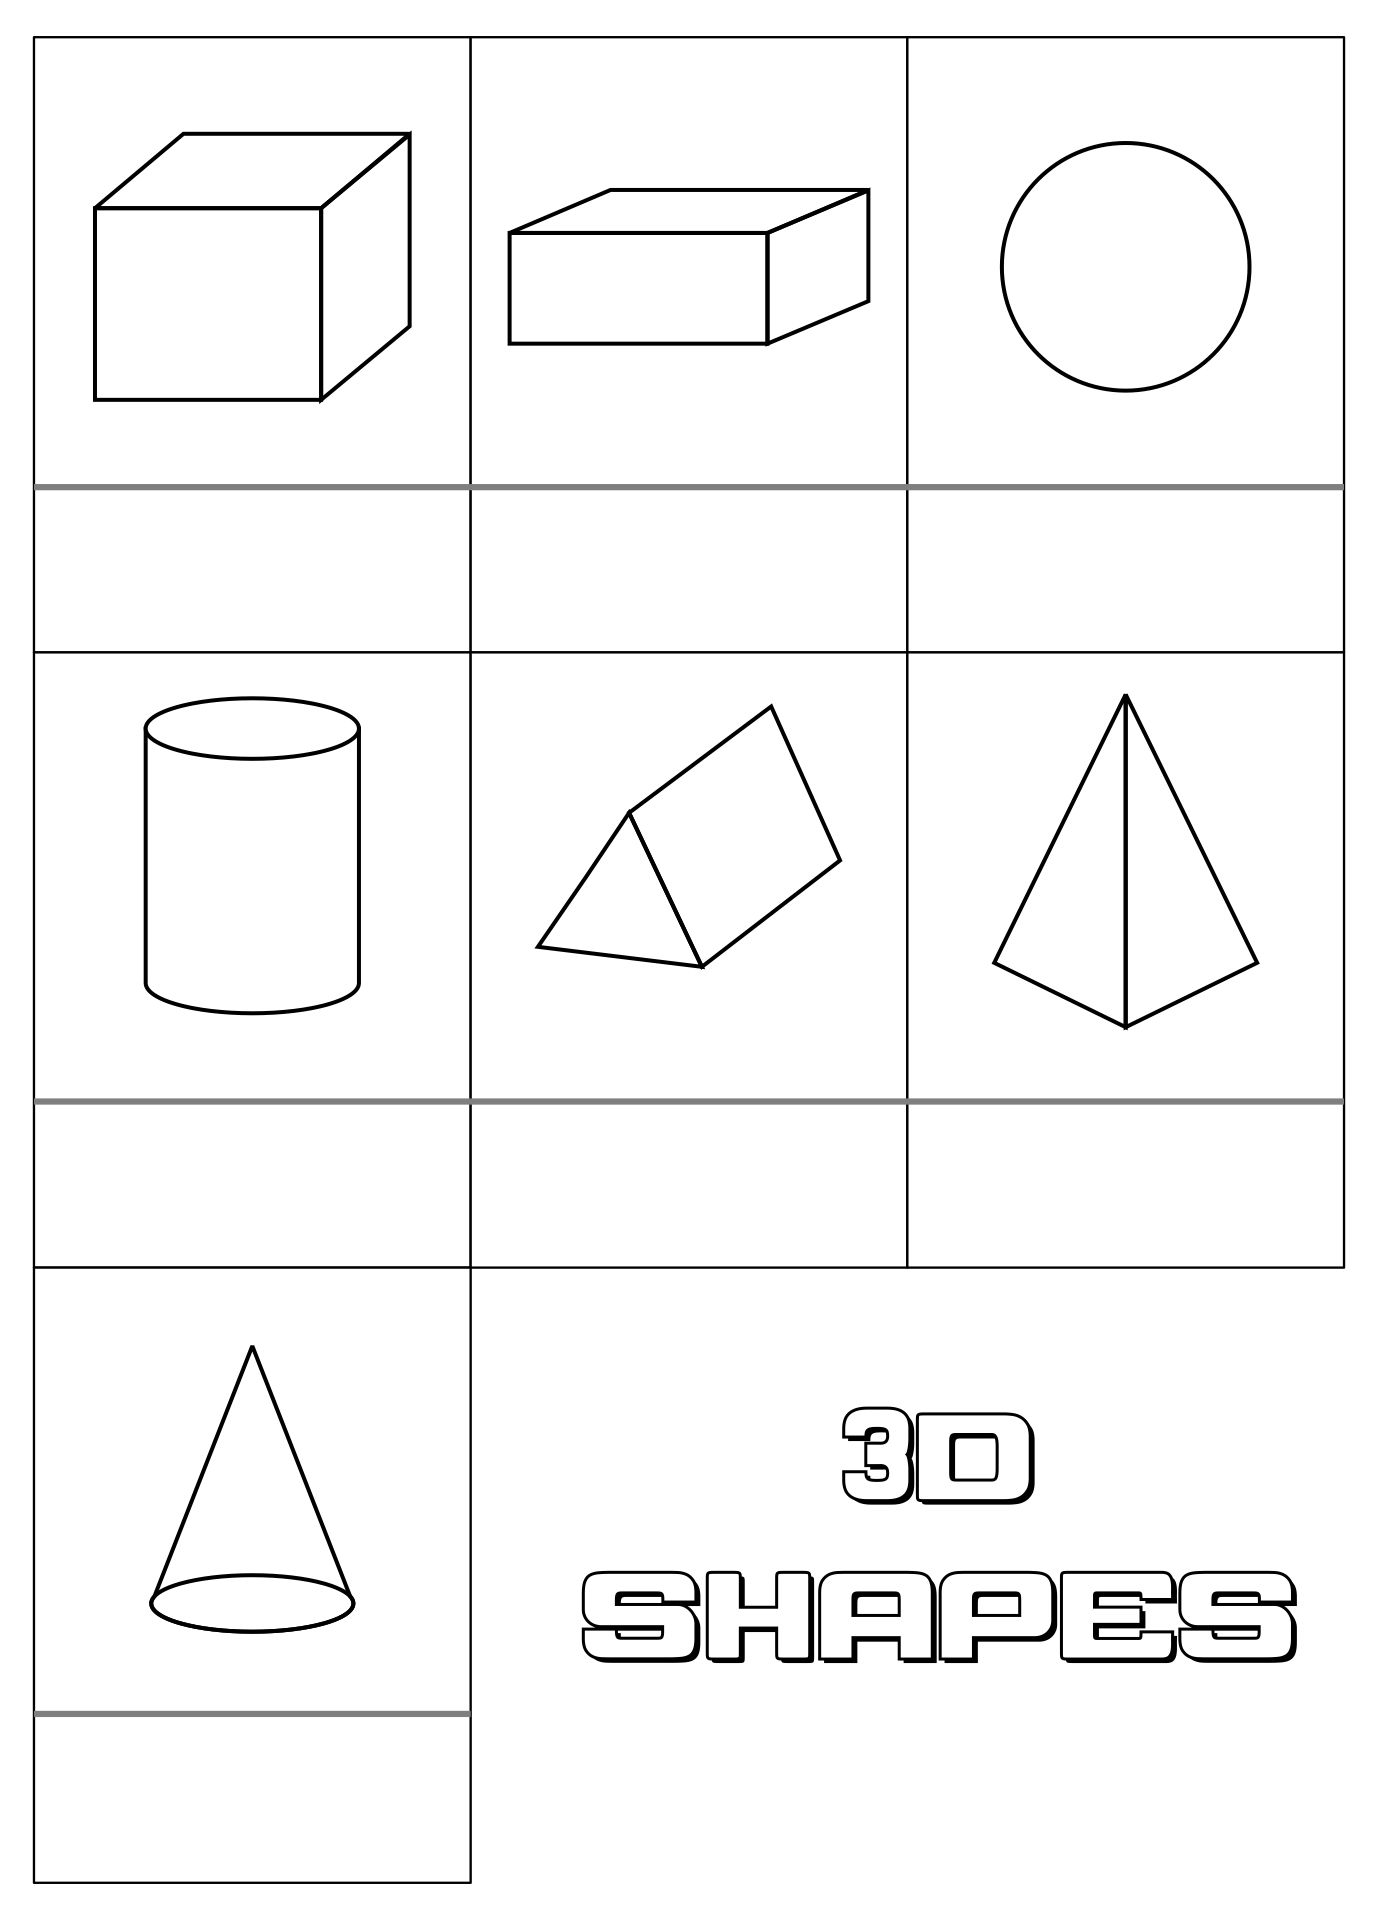 10-best-3d-printable-shapes-to-cut-pdf-for-free-at-printablee